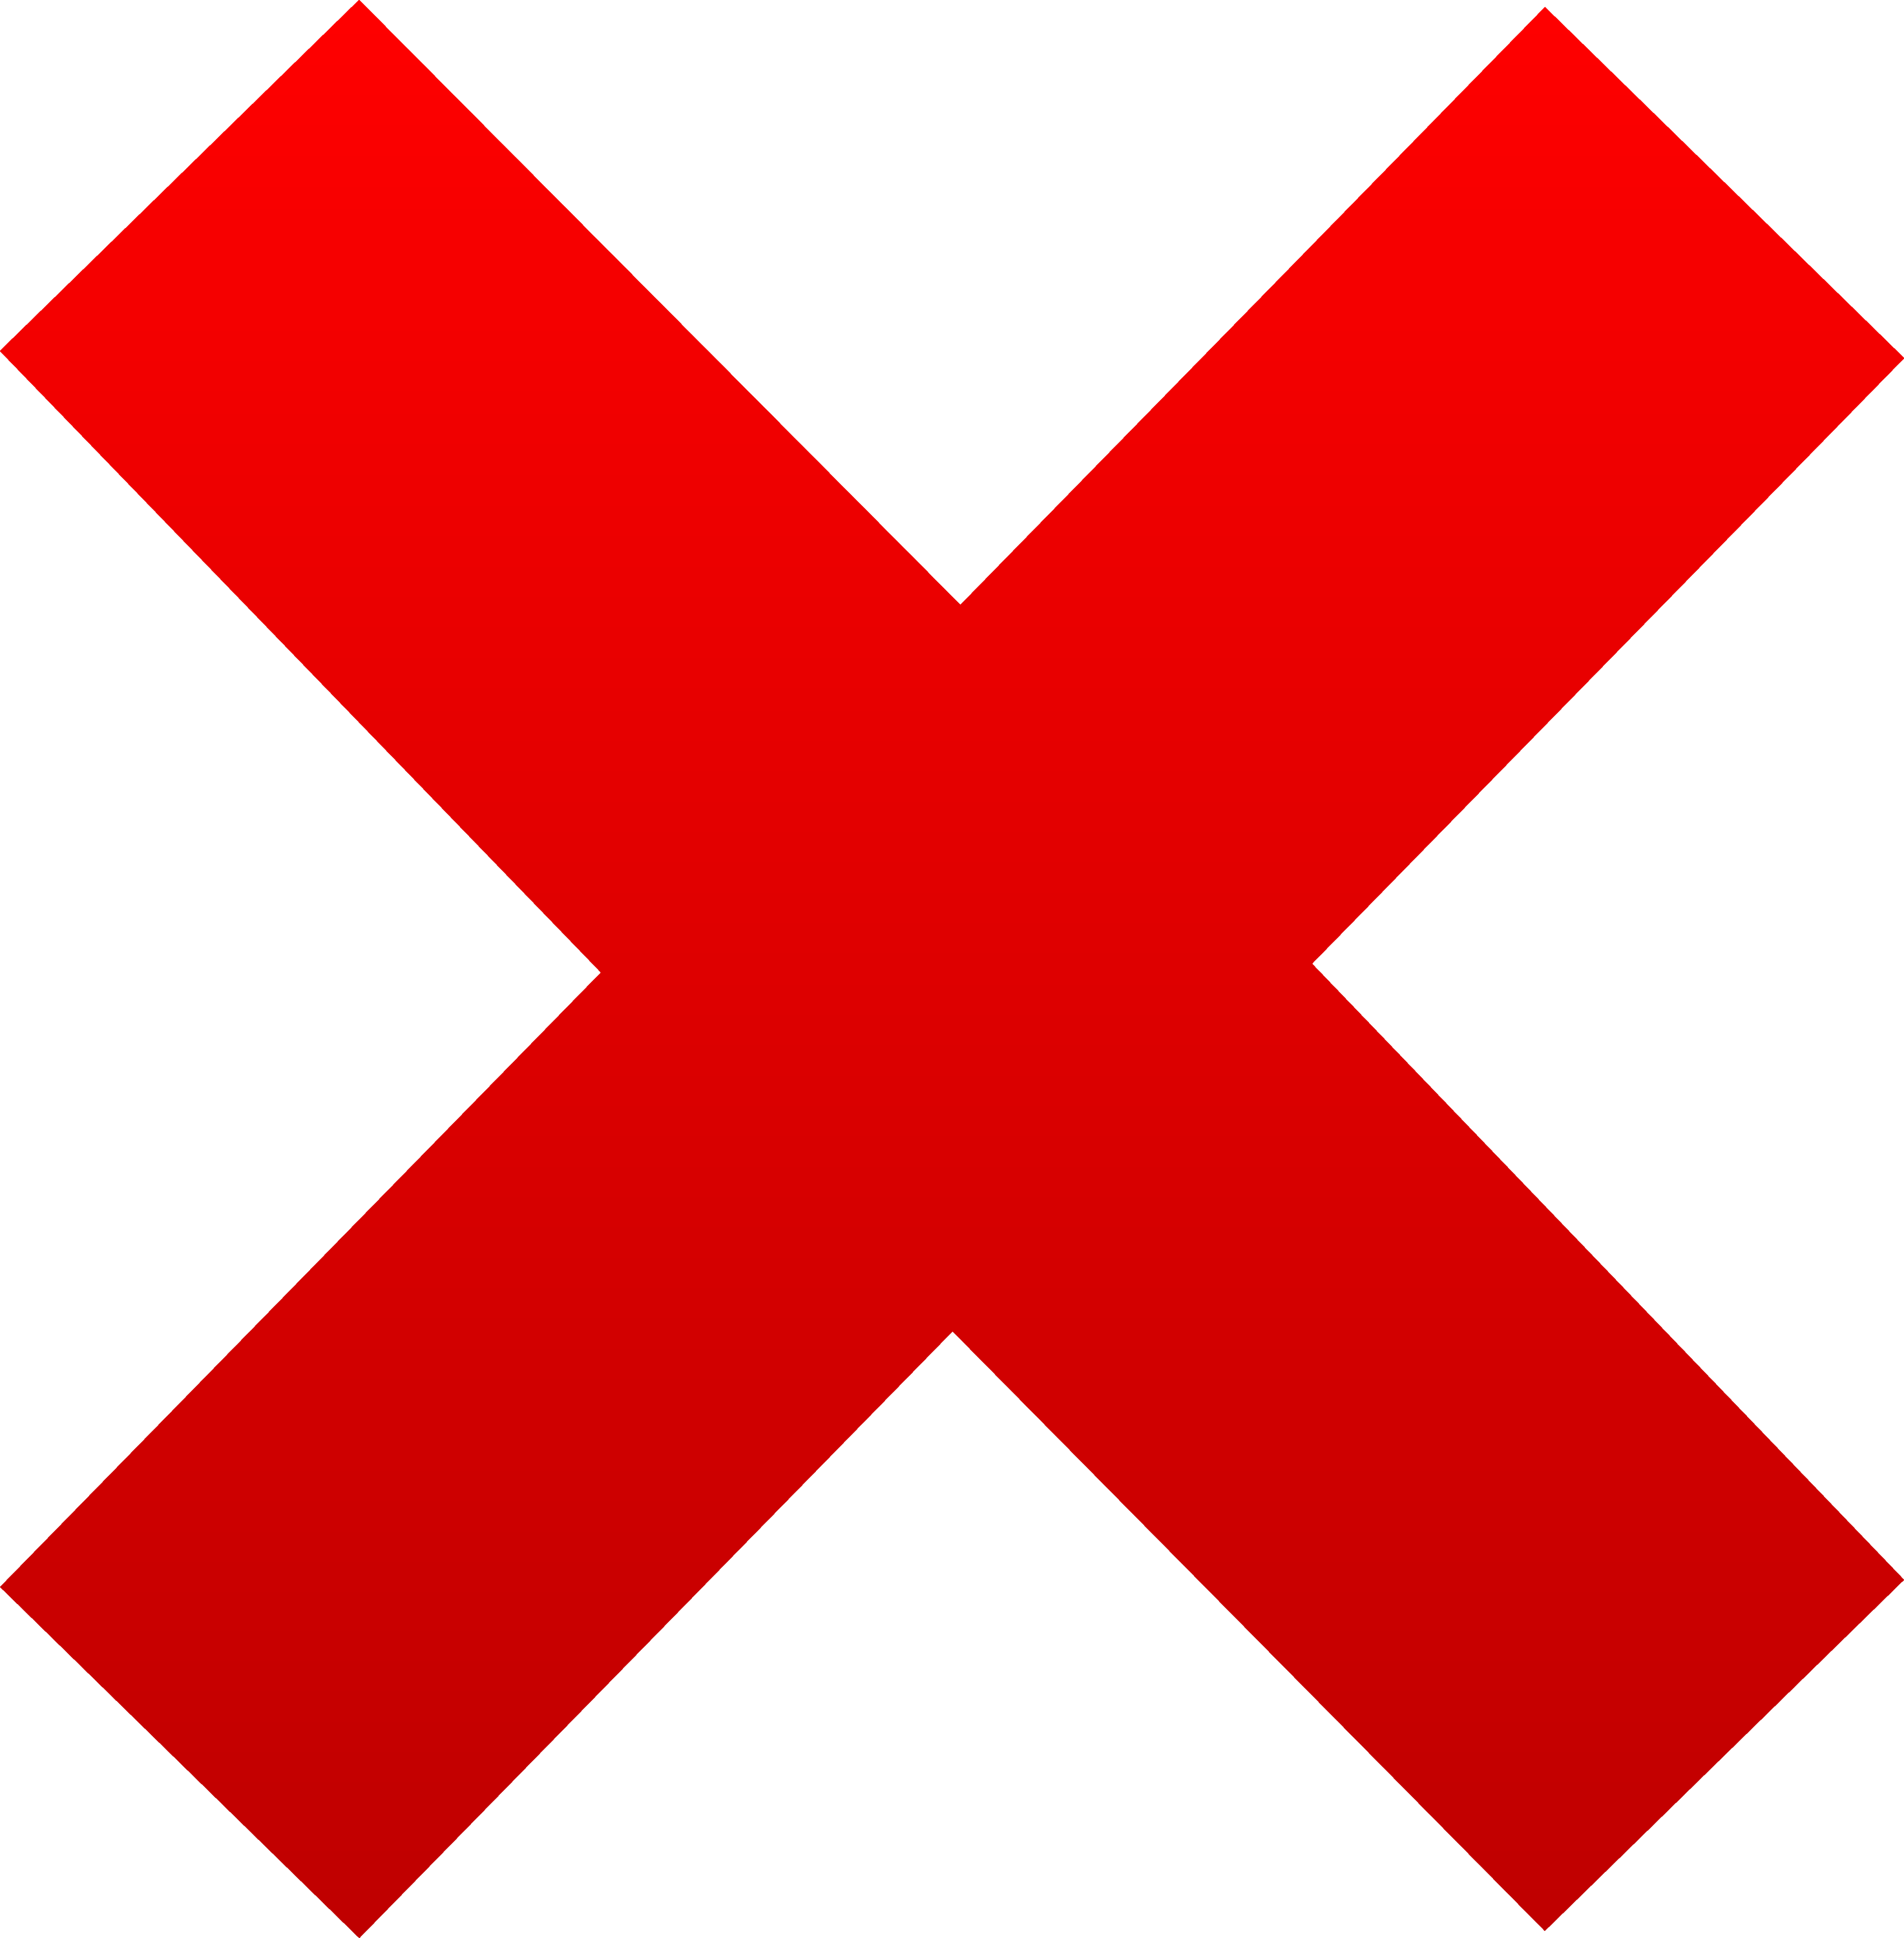 Simple Red X Mark Free Clip Art